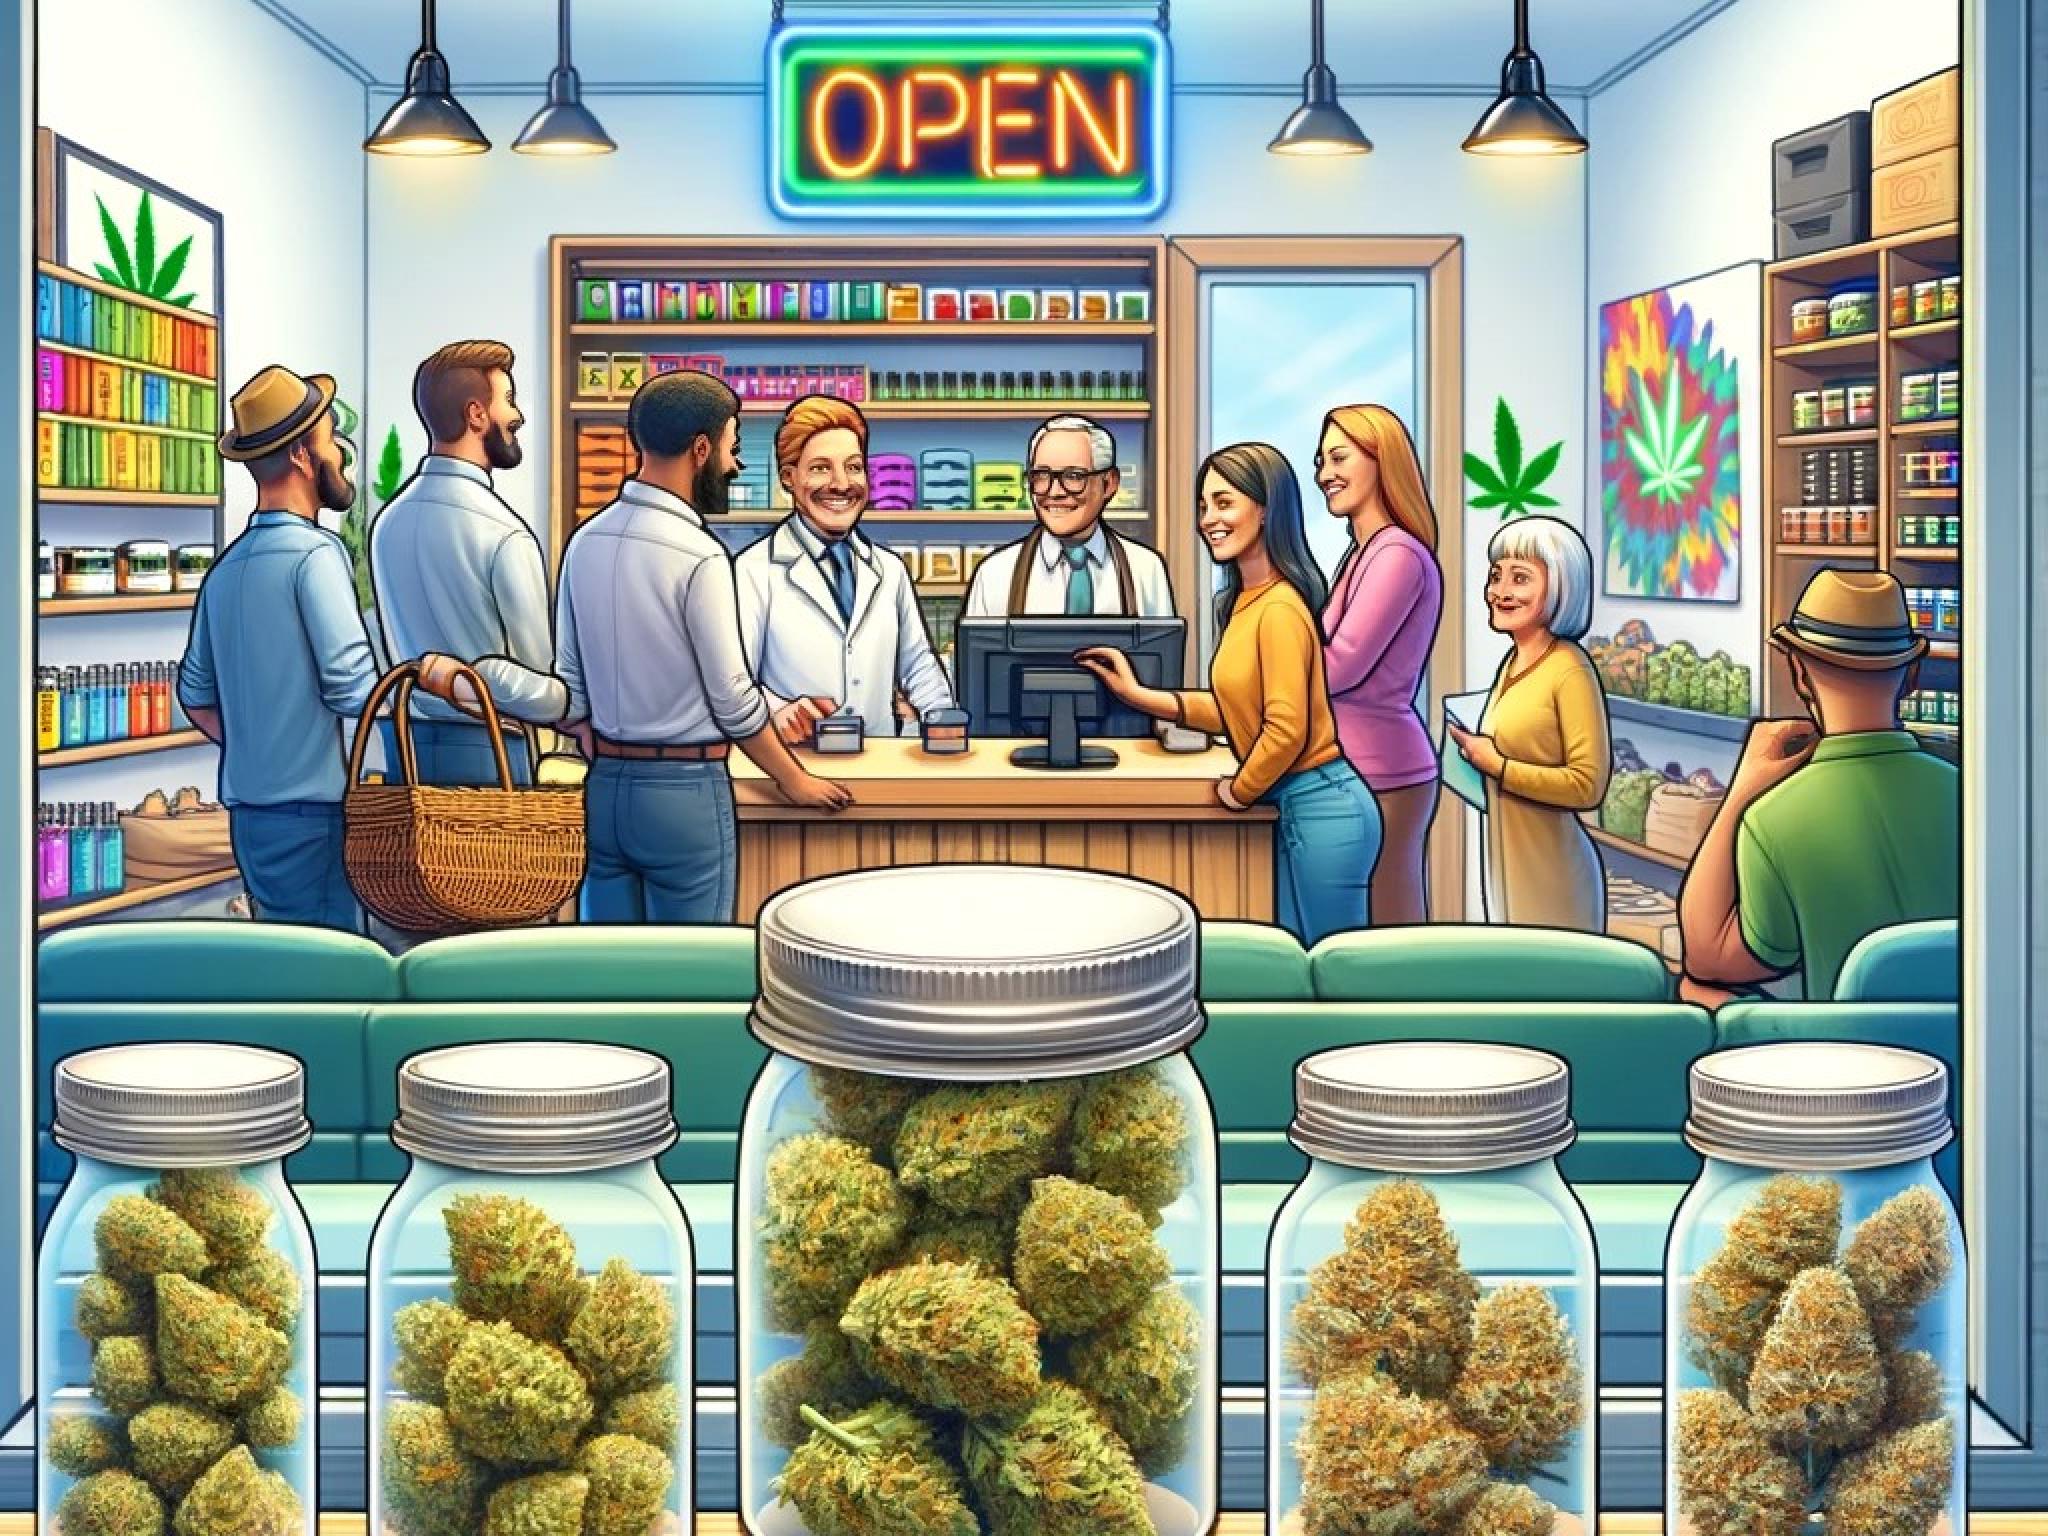  what-happens-in-vegas-first-legal-weed-lounge-opens-freeing-adults-from-consumption-stigma 